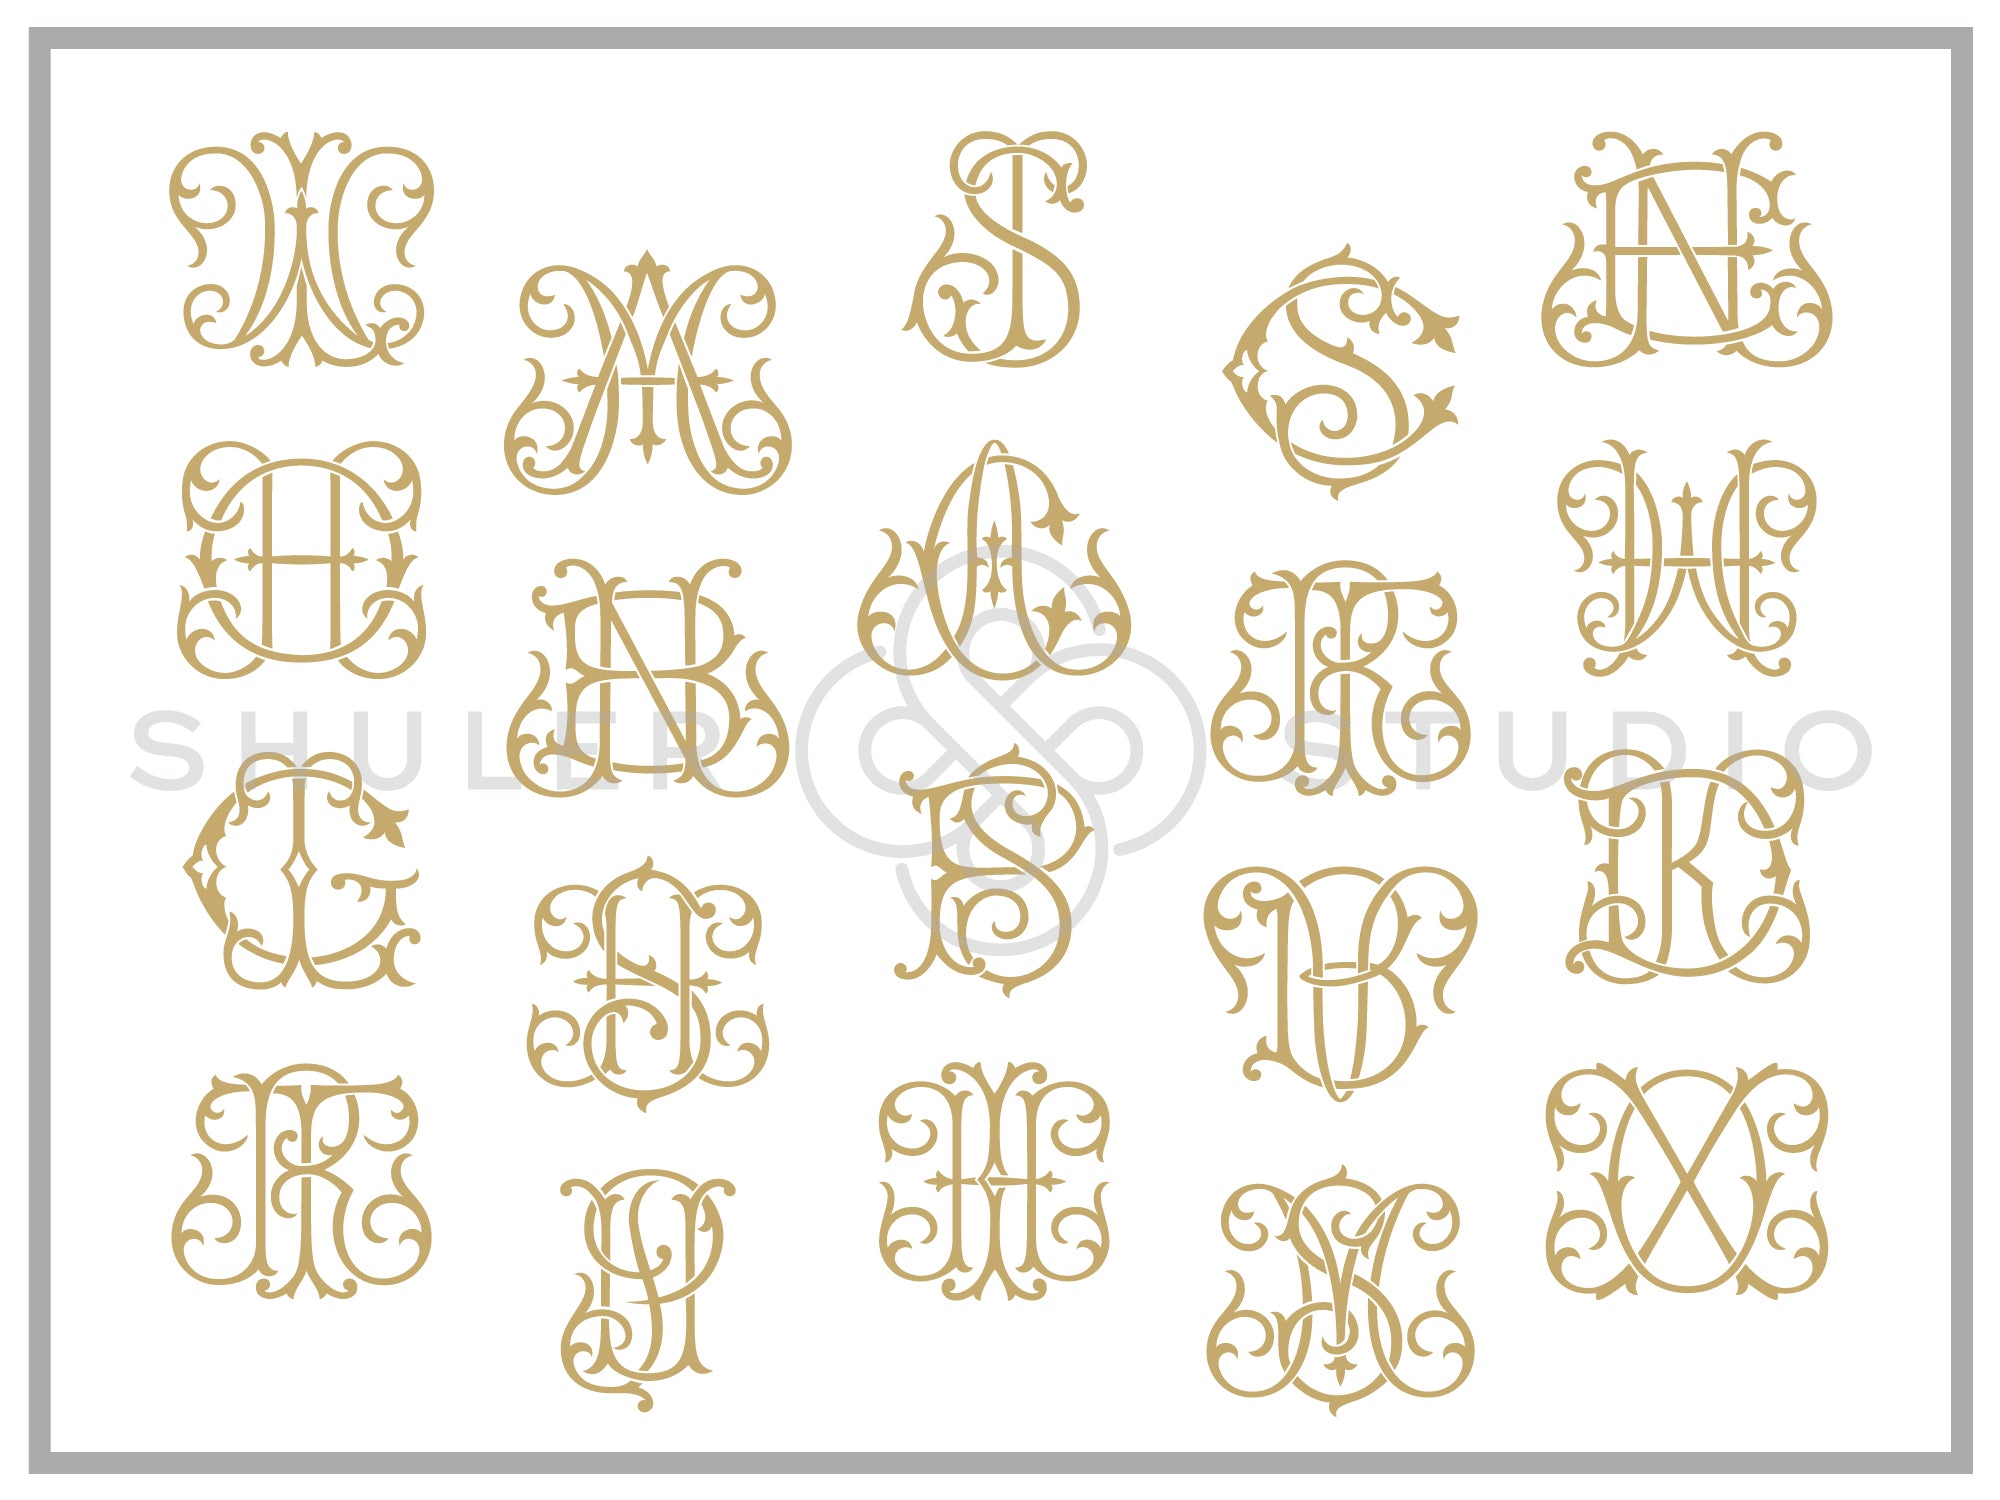 Monogram Couture Font for Embroidery – Shuler Studio